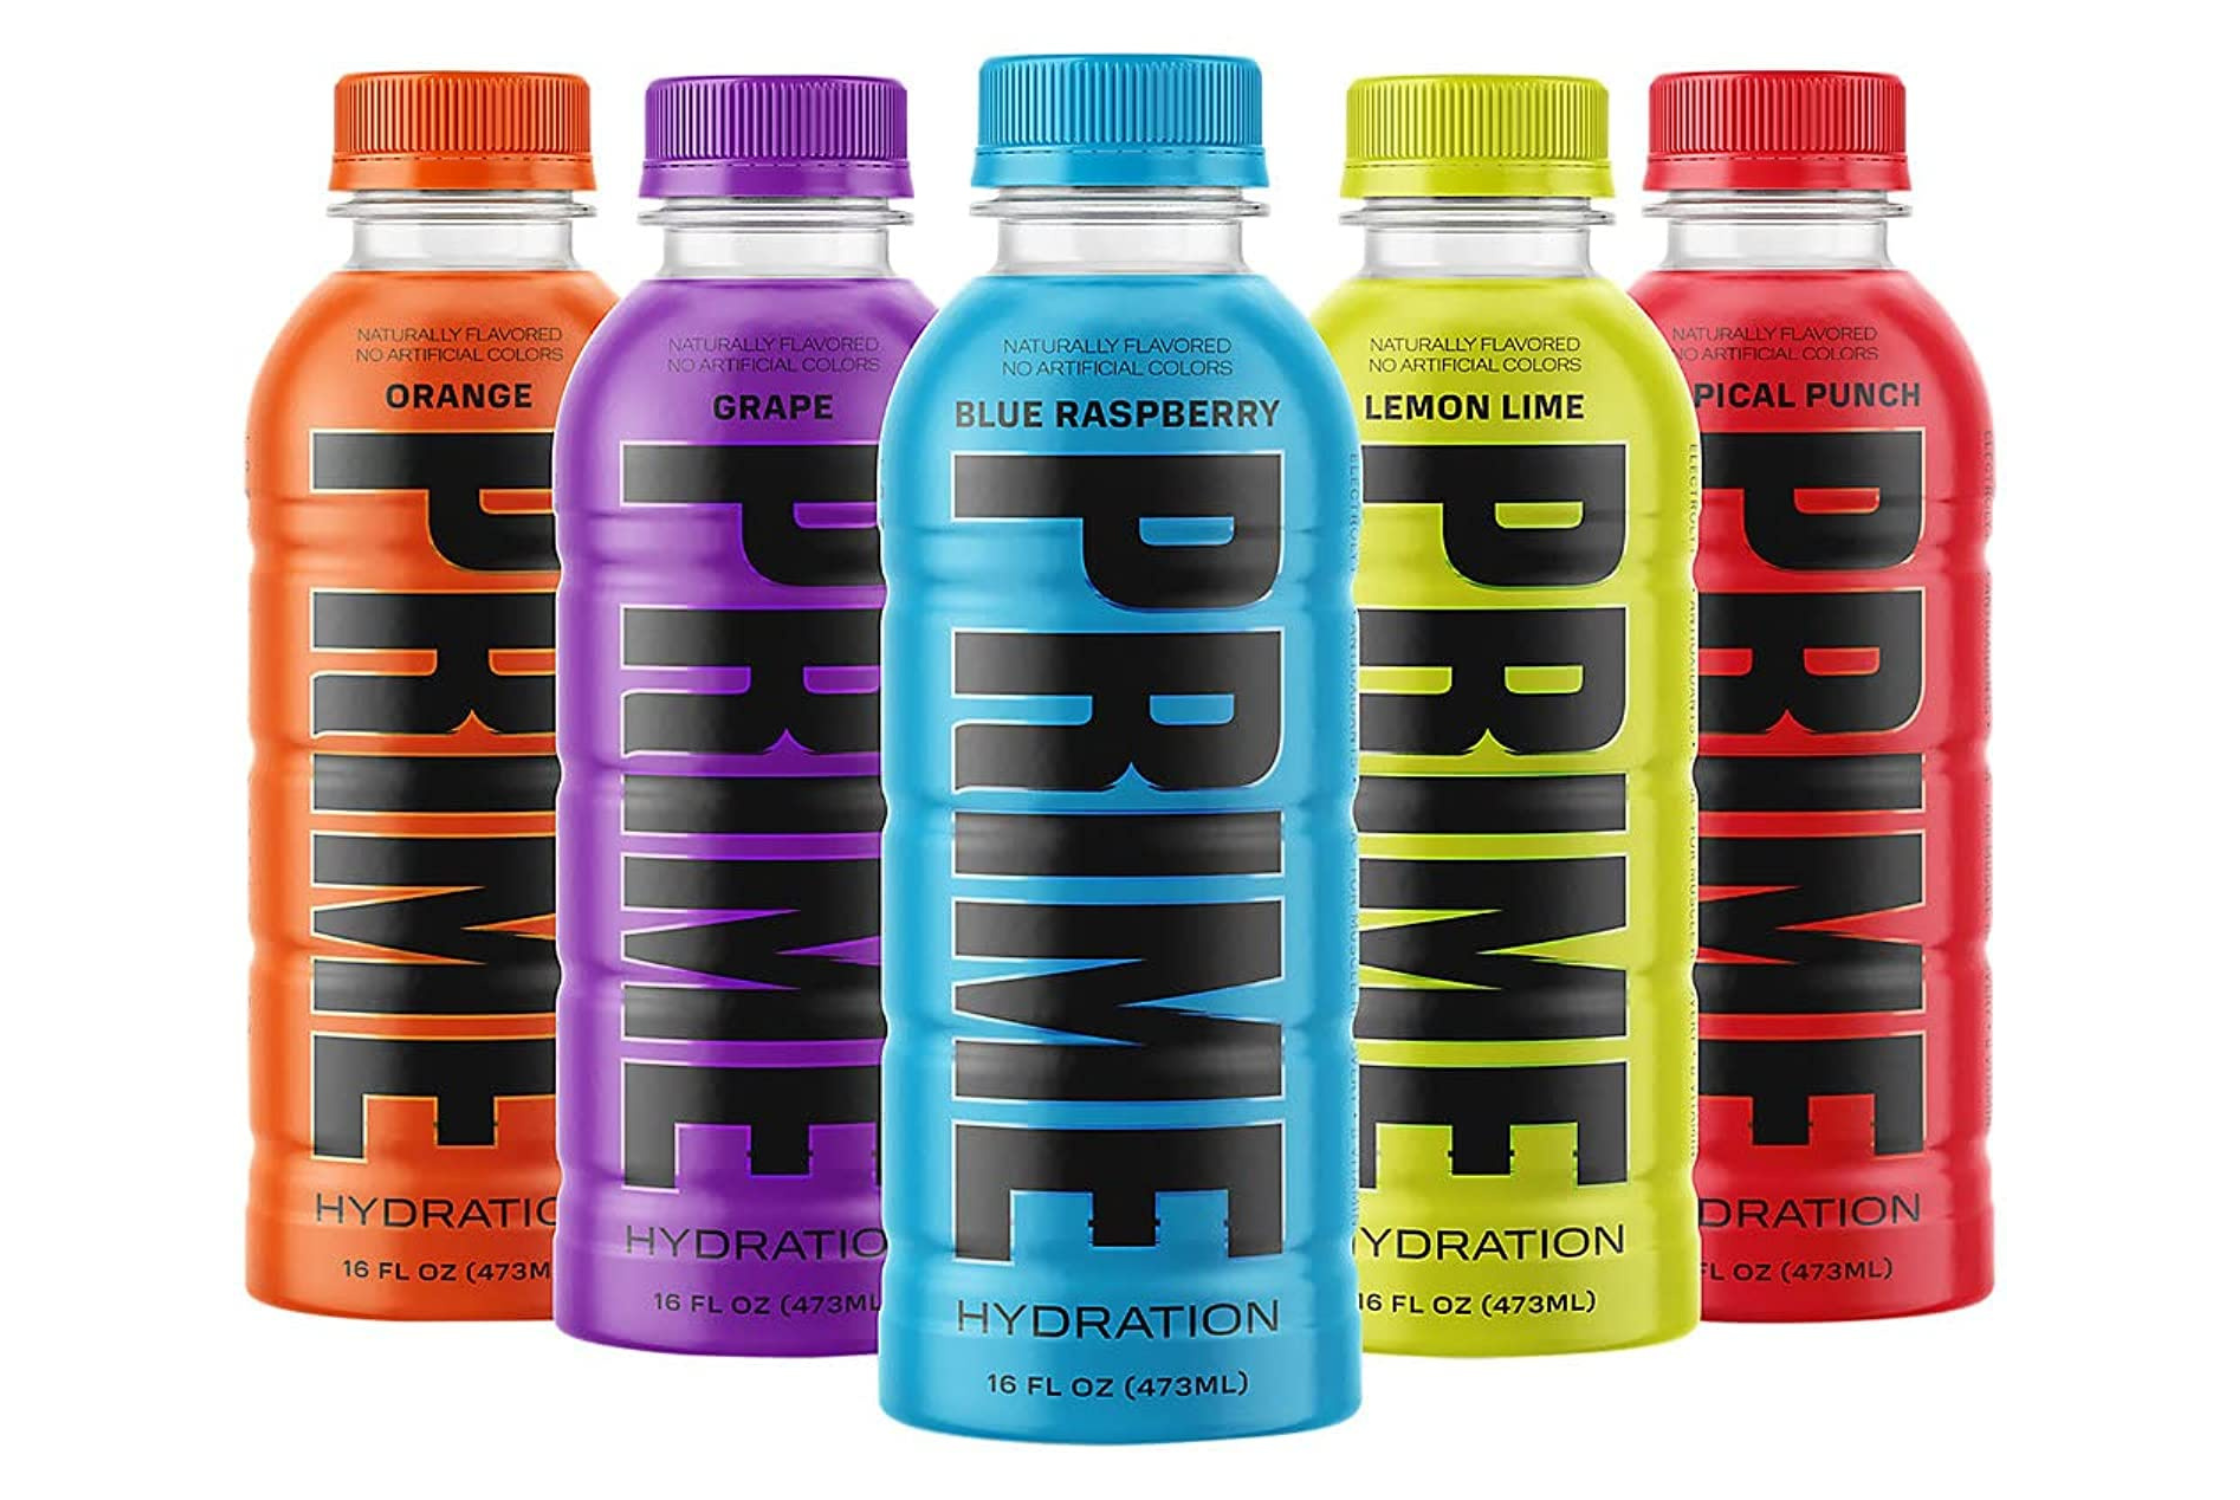 Prime Hydration: Is it Safe for Kids?